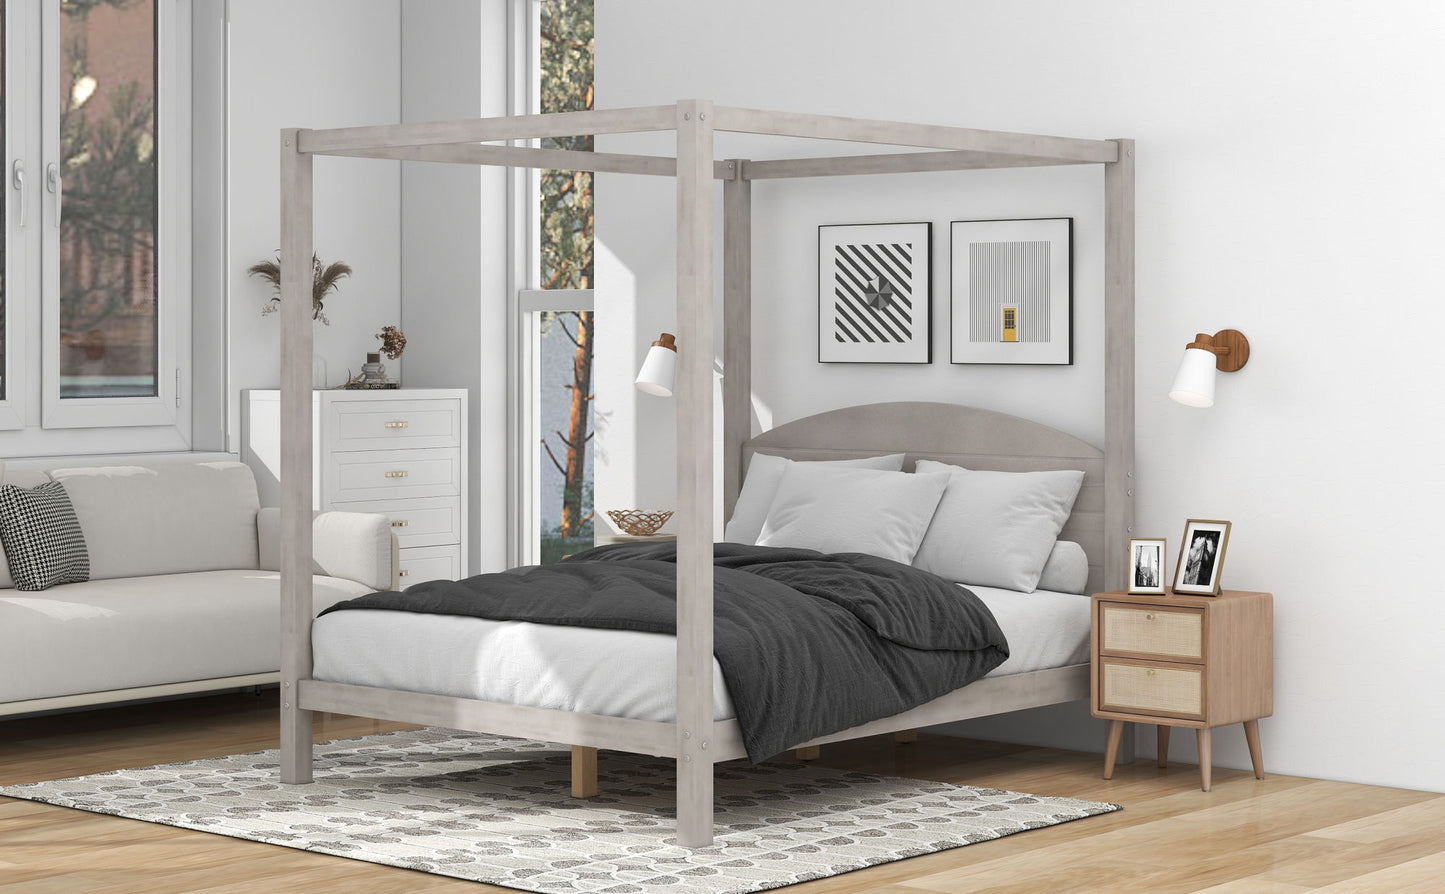 queen size canopy platform bed with headboard and support legs